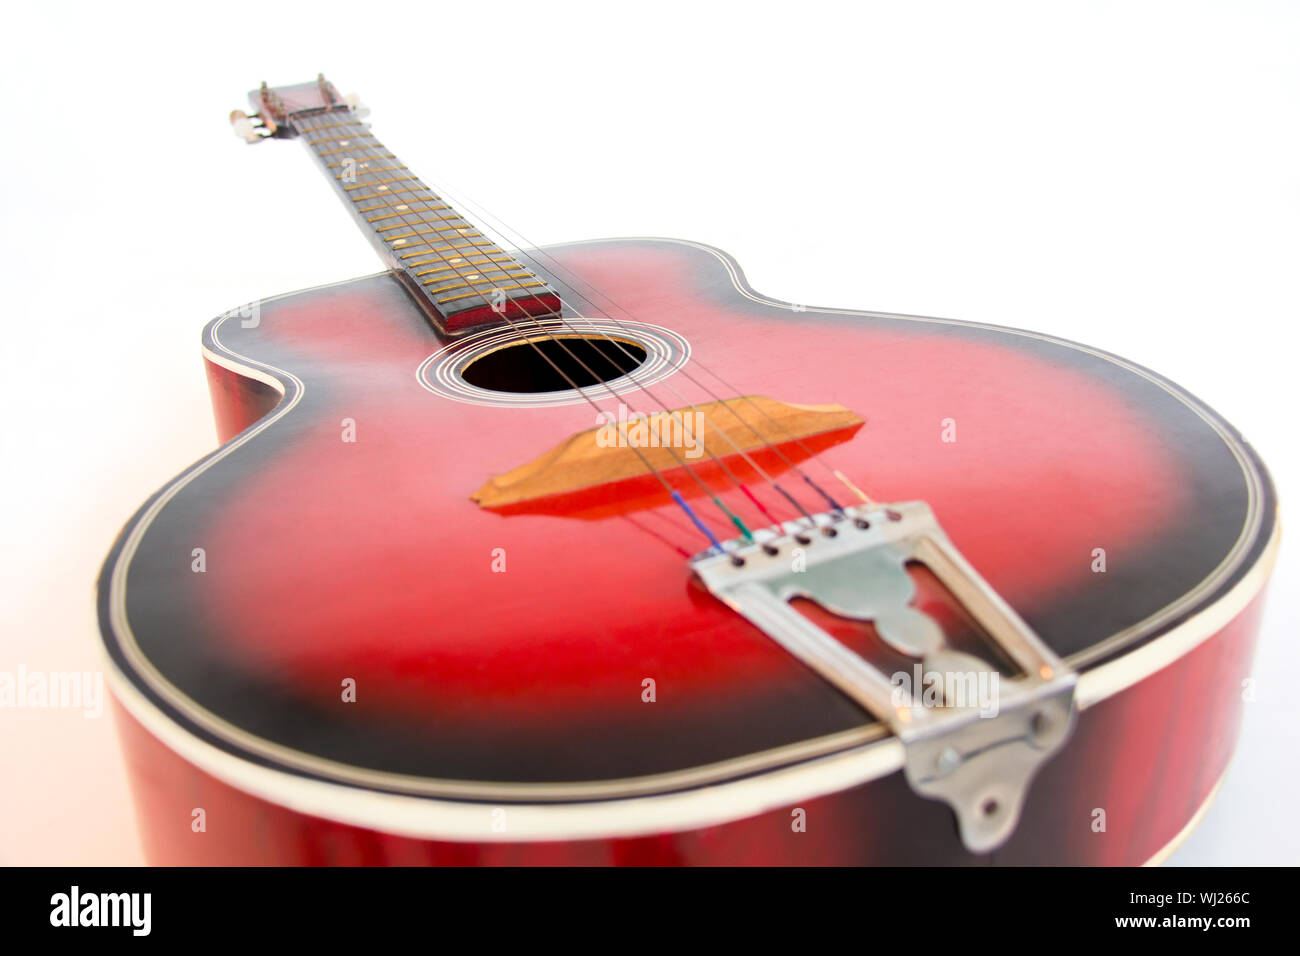 Close up of a red guitar Stock Photo